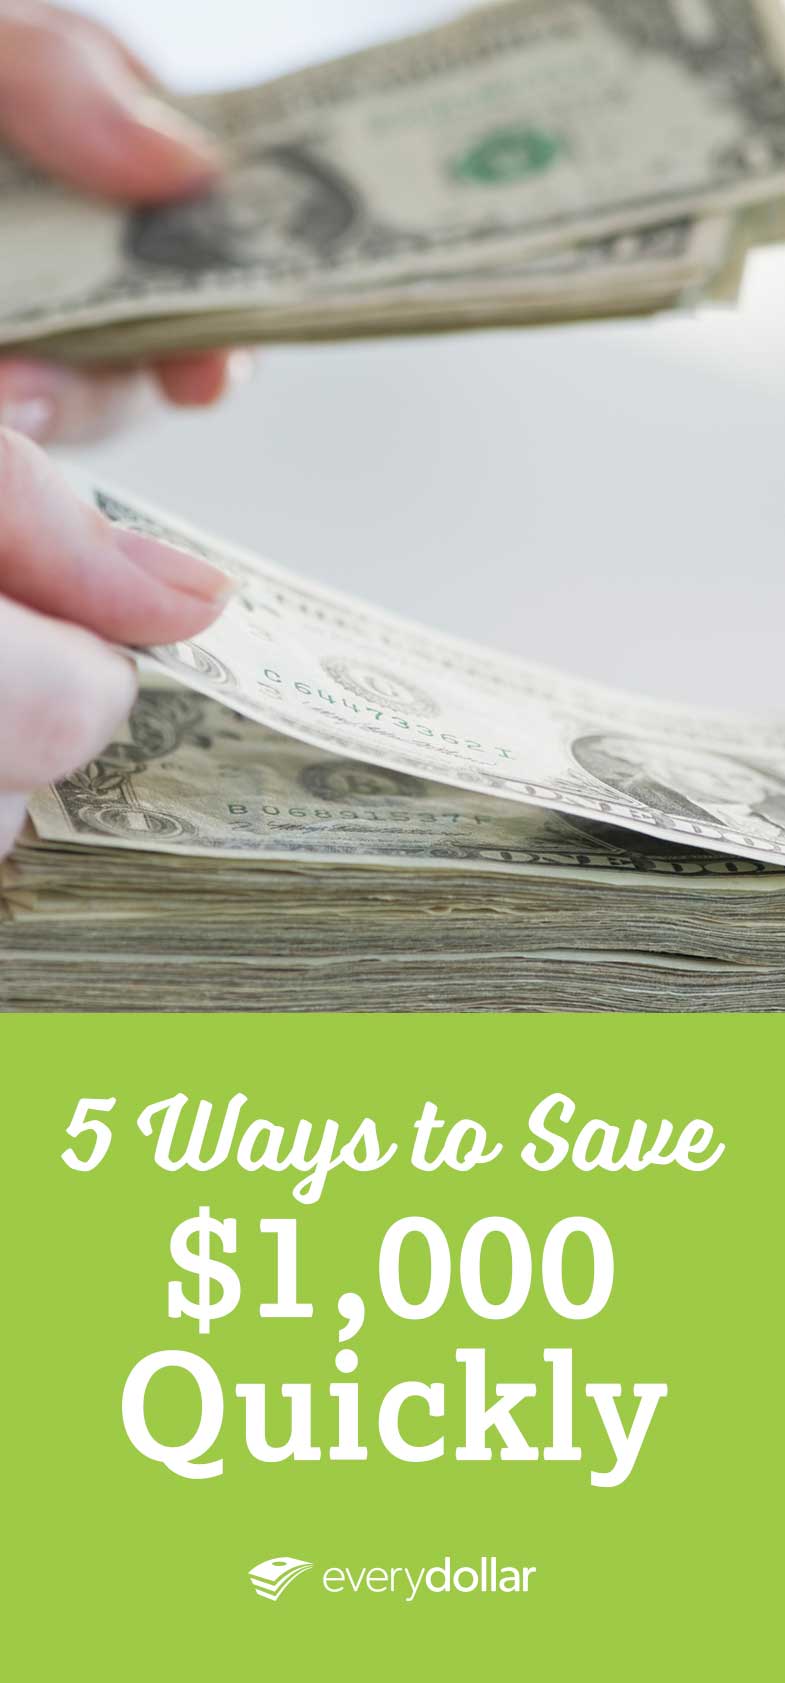 5 Ways to Save 1,000 Quickly